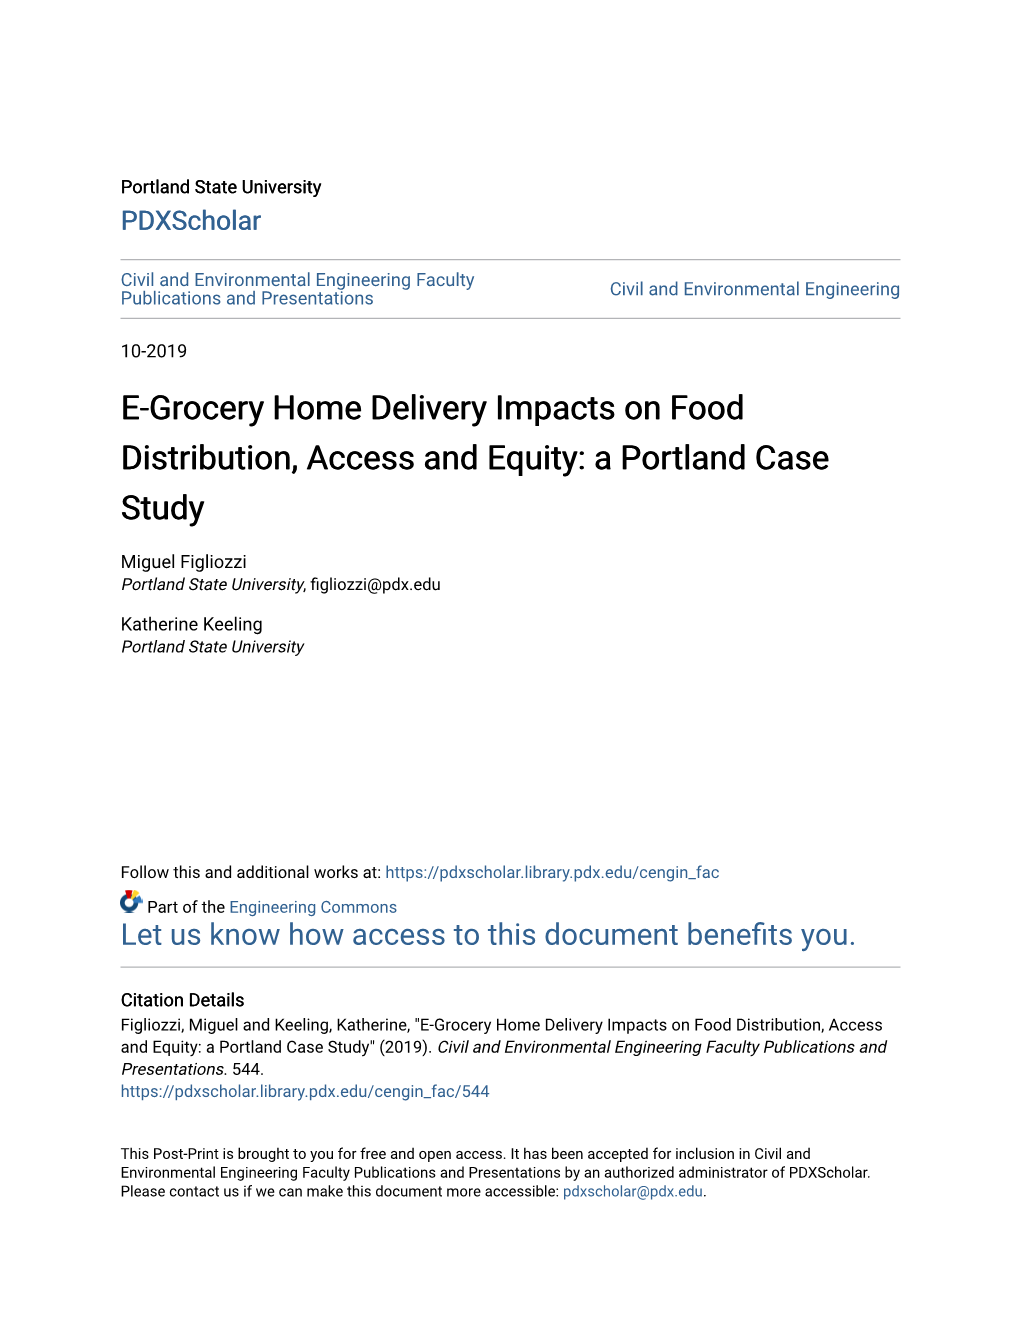 E-Grocery Home Delivery Impacts on Food Distribution, Access and Equity: a Portland Case Study